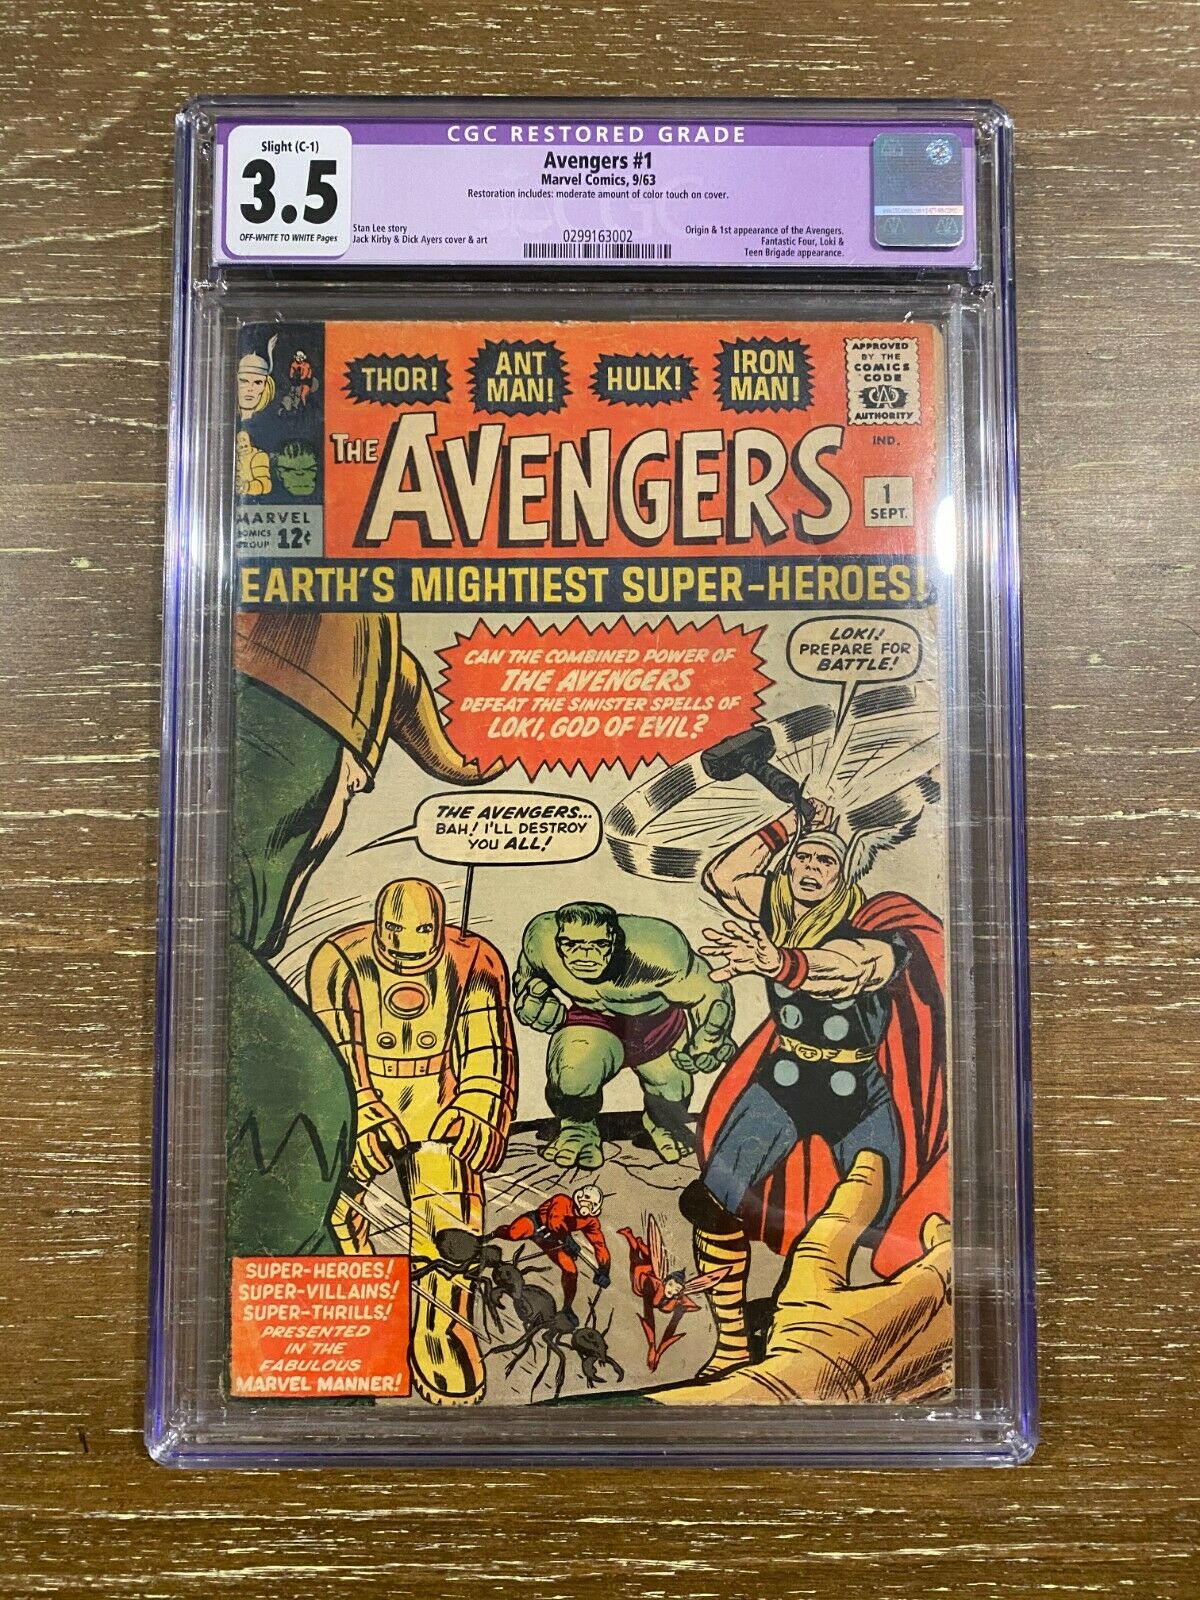 AVENGERS 1 1963 CGC 35 OffWhite to White Pages RESTORED PURPLE